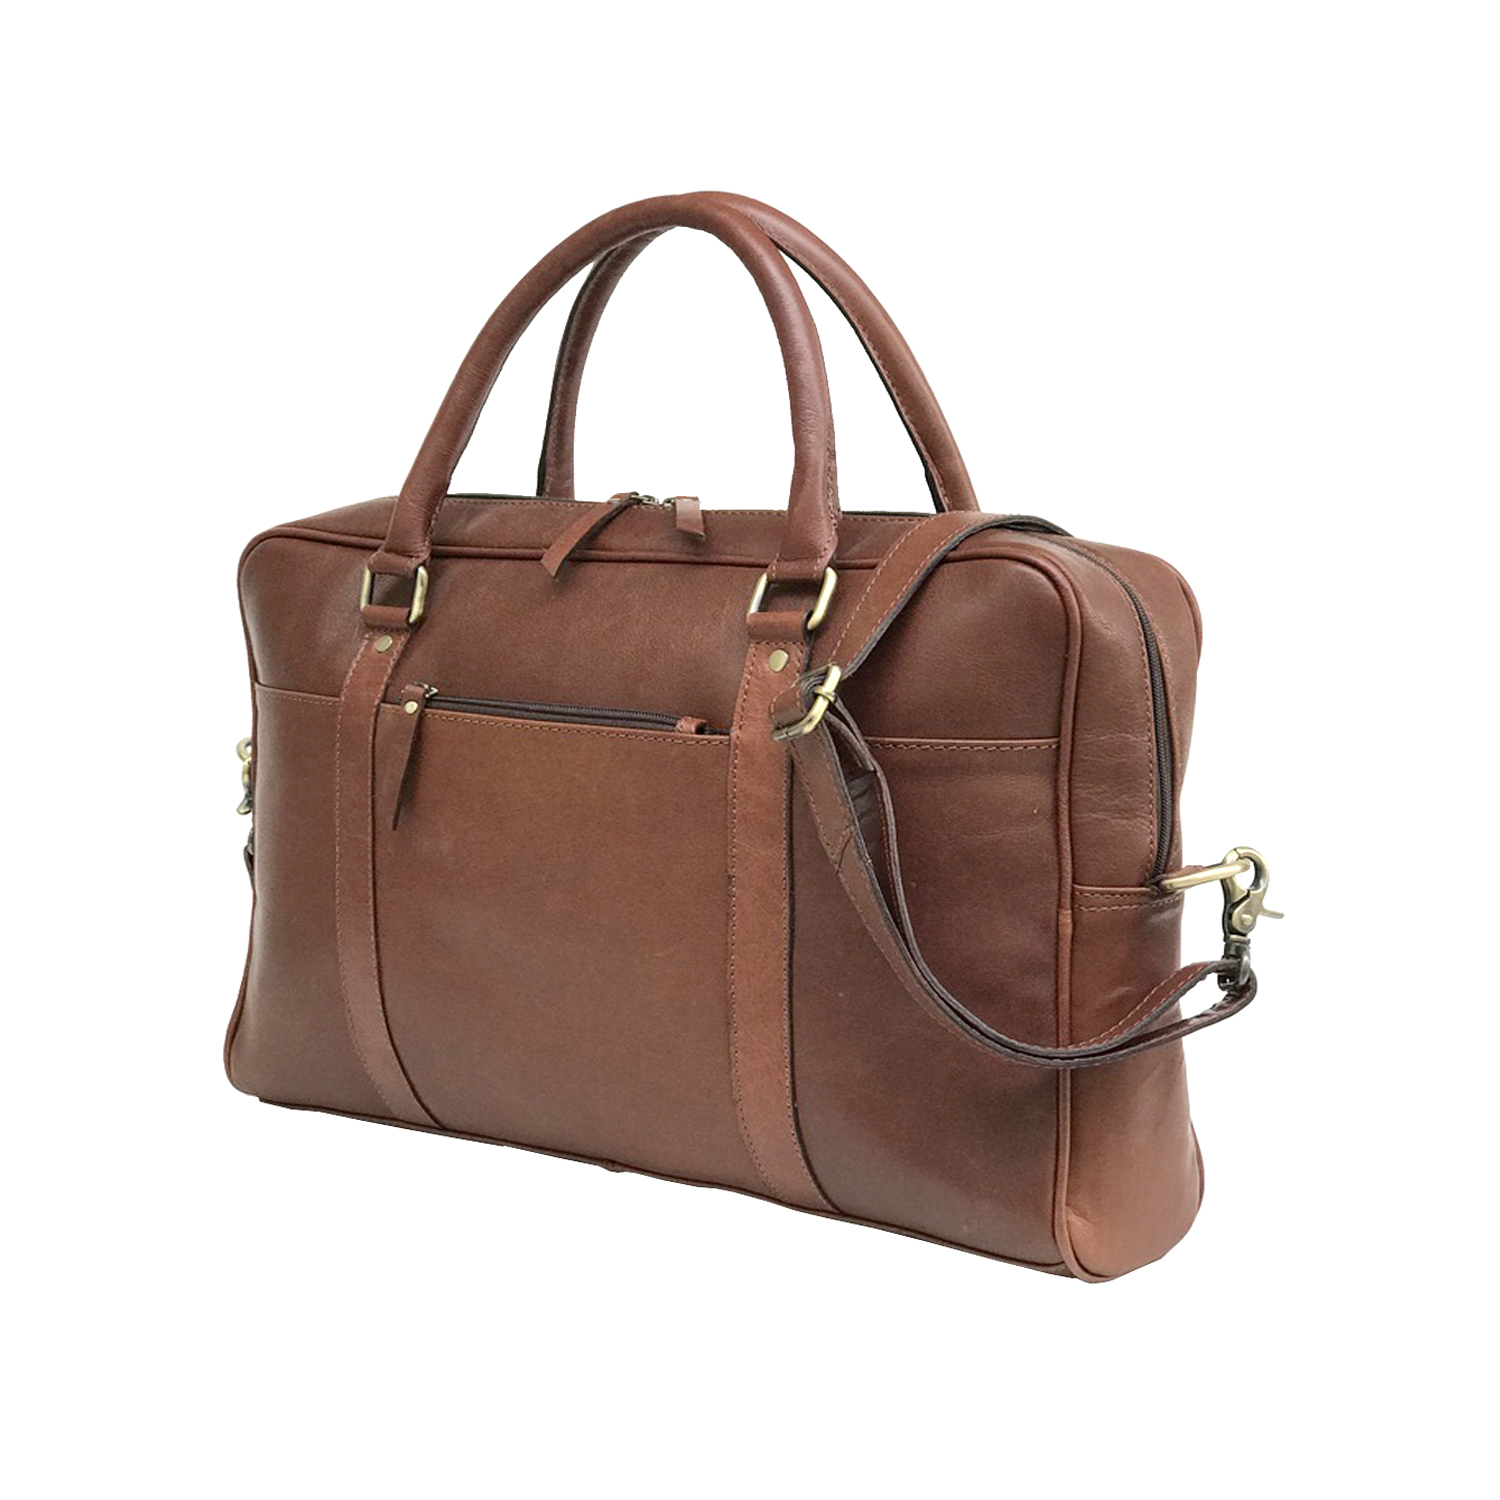 Executive -Leather Laptop Bag Coffee Brown – Affordable Leather Bags,Wallets,Jackets Online